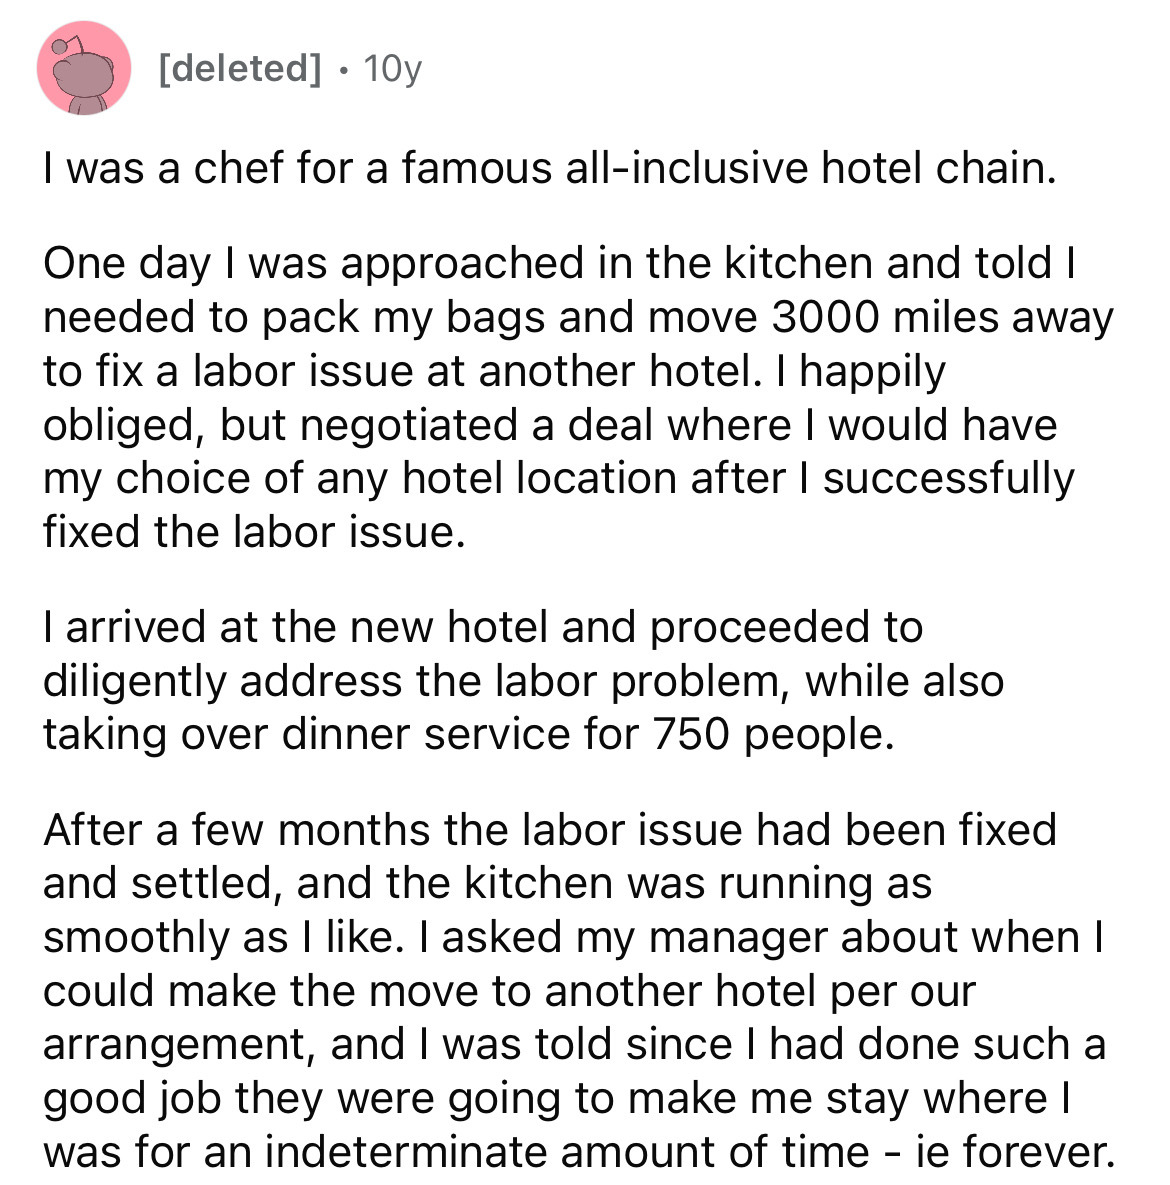 document - deleted 10y I was a chef for a famous allinclusive hotel chain. One day I was approached in the kitchen and told I needed to pack my bags and move 3000 miles away to fix a labor issue at another hotel. I happily obliged, but negotiated a deal w